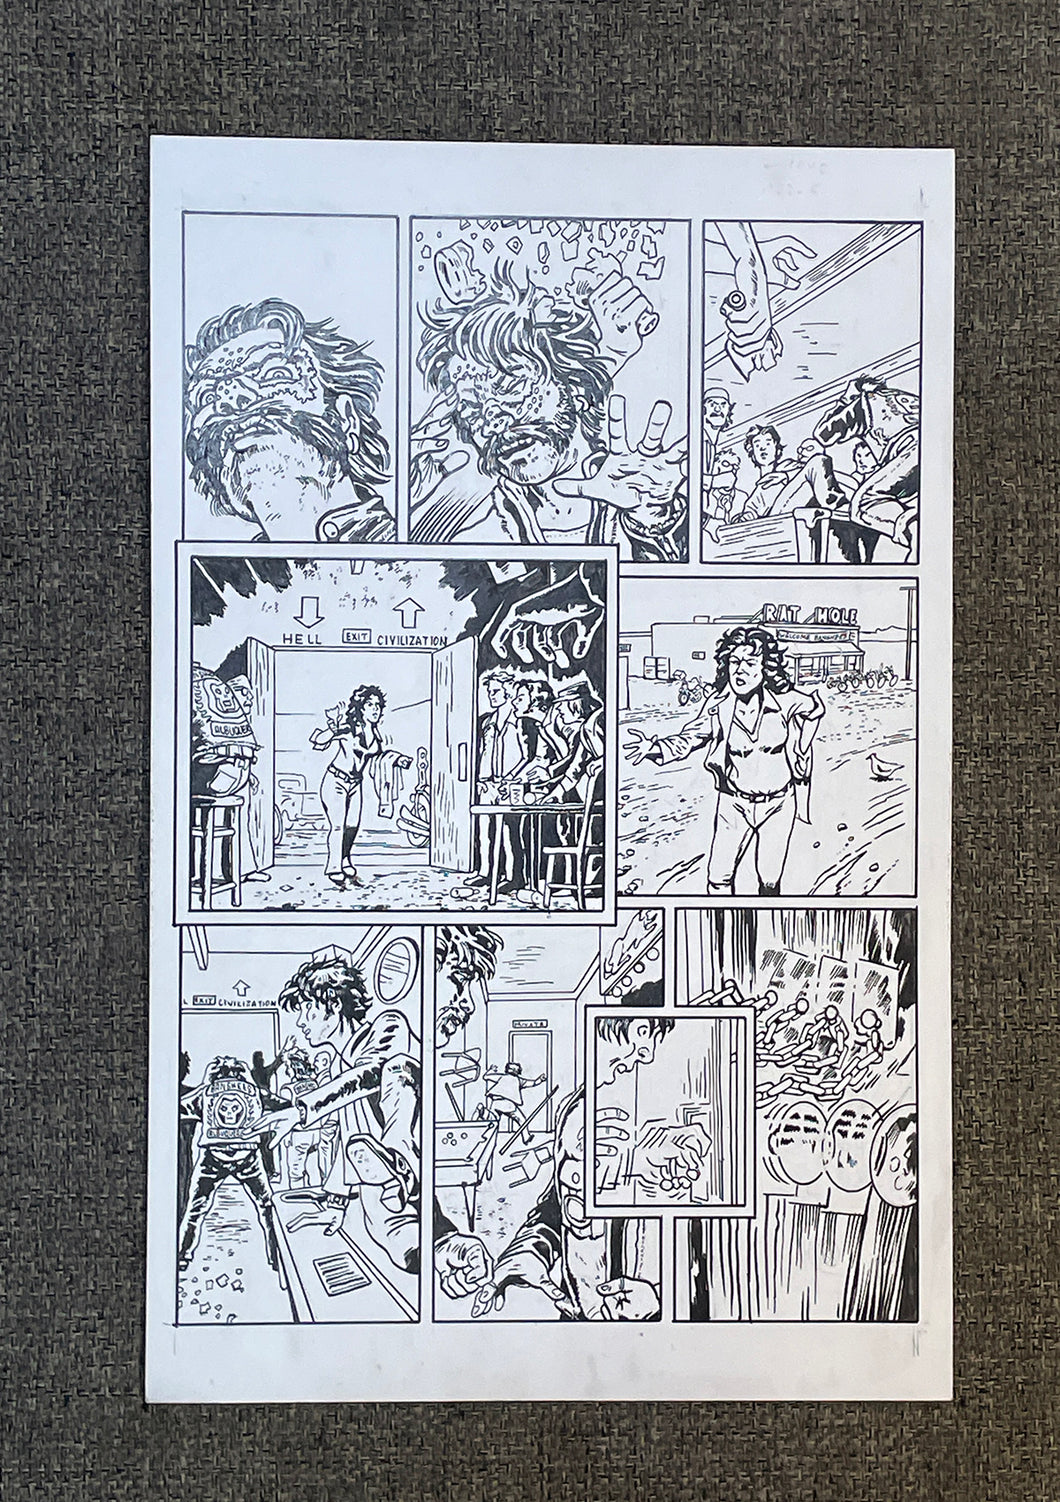 Original art: Mayfield Eight Part Two, page 17